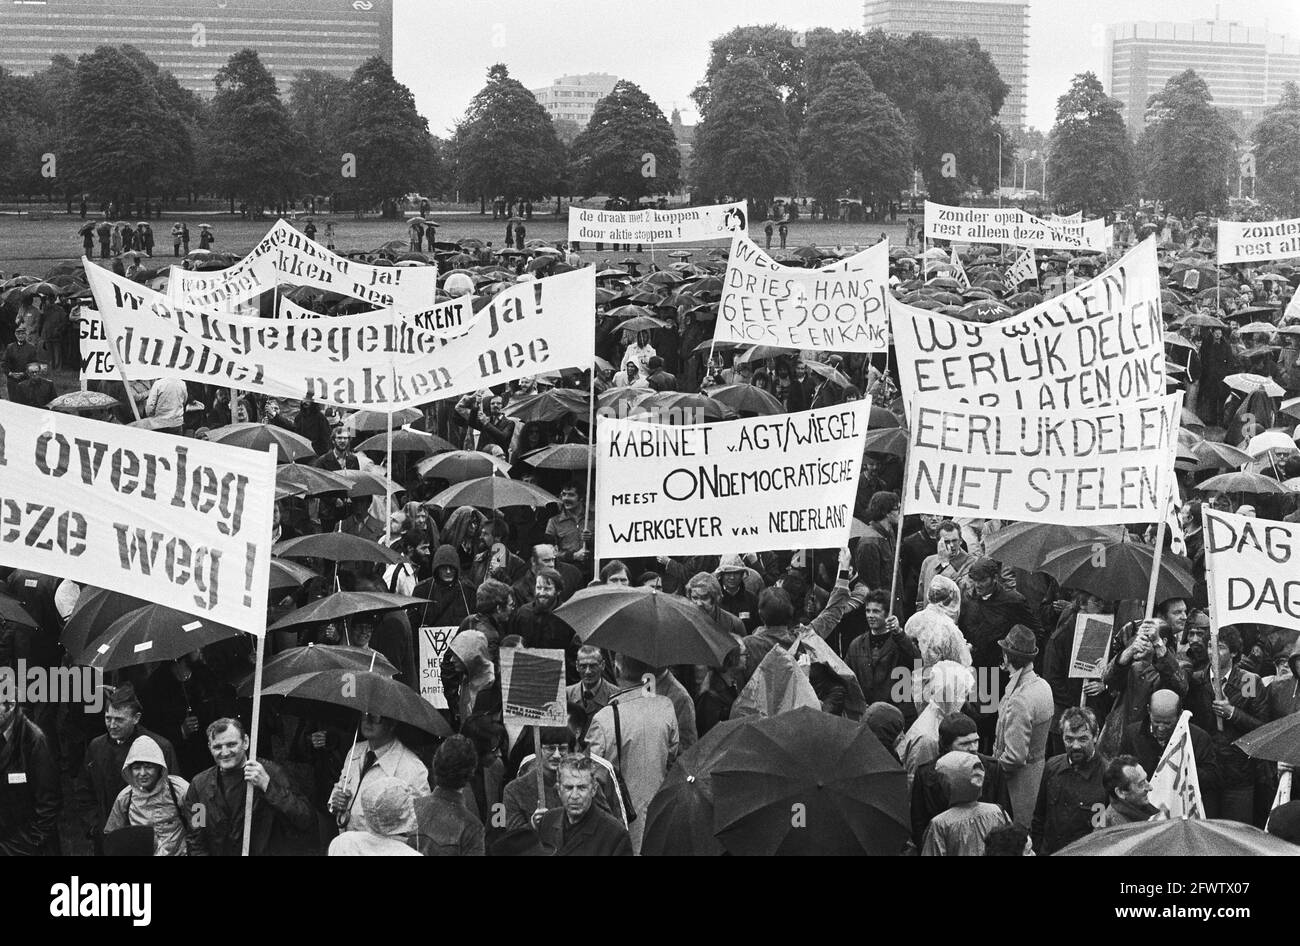 Civil Servants Demonstration, The Hague against Van Agt's Austerity Plans, overview meeting on Malieveld, June 26, 1978, Civil Servants, Austerity, meetings, demonstrations, The Netherlands, 20th century press agency photo, news to remember, documentary, historic photography 1945-1990, visual stories, human history of the Twentieth Century, capturing moments in time Stock Photo